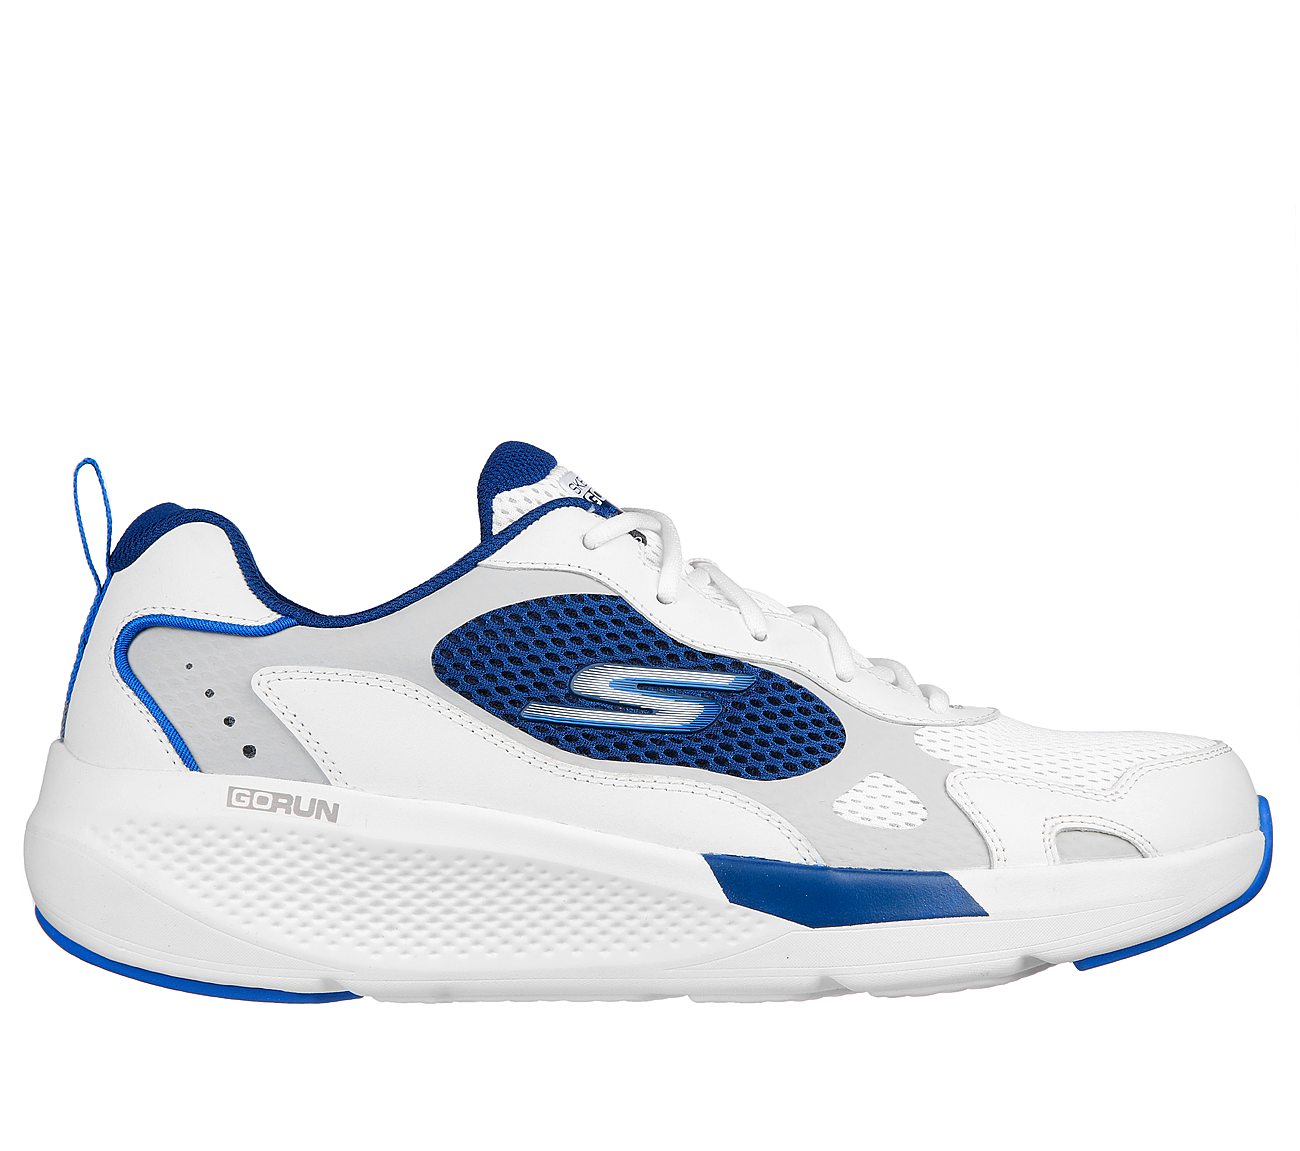 GO RUN ELEVATE - NANDAYUS, WHITE/NAVY Footwear Lateral View